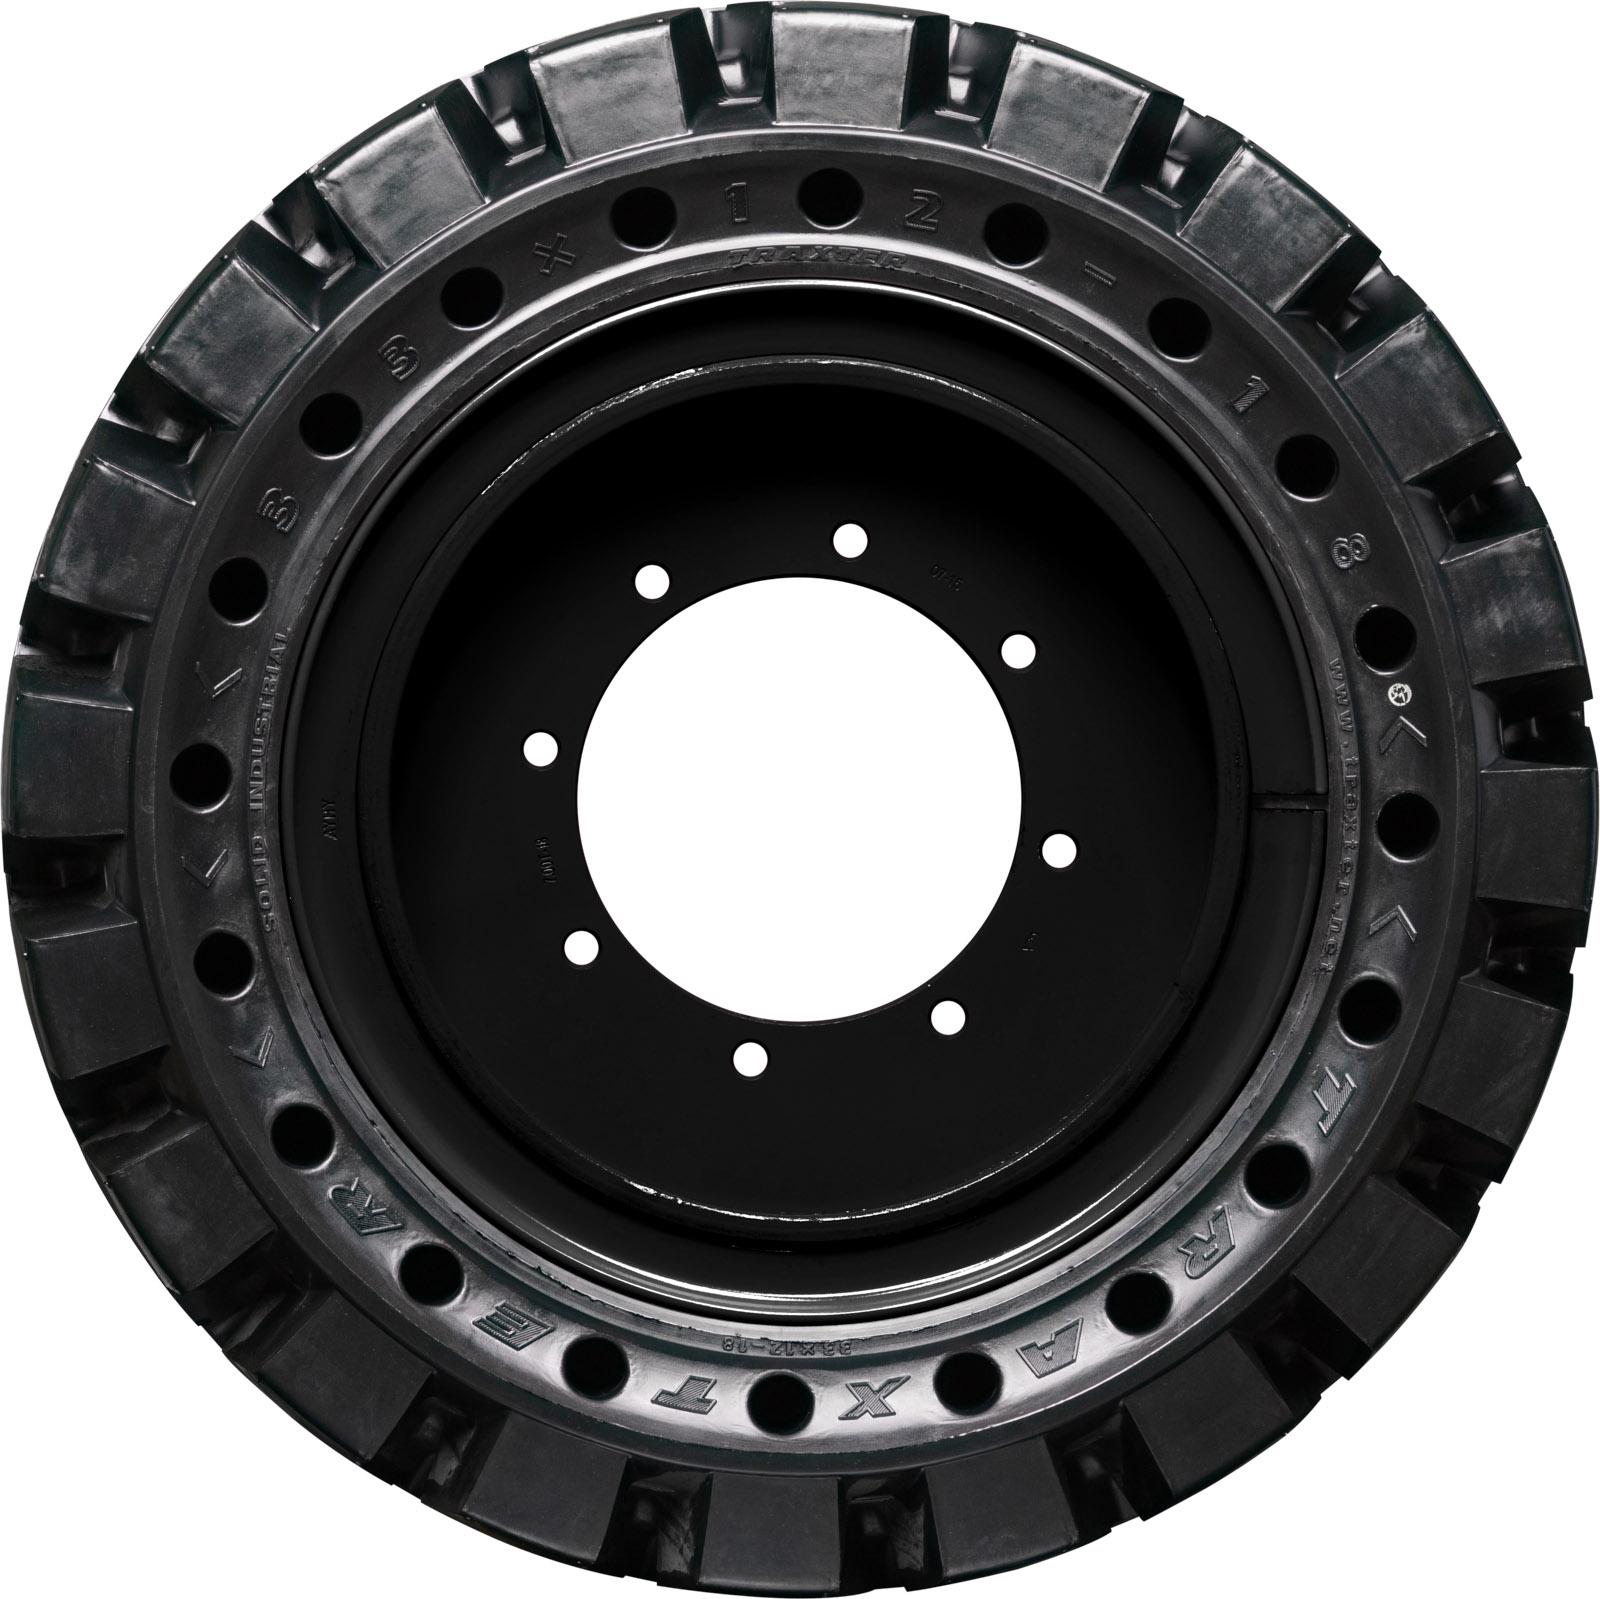 set of 4 traxter 30x10-16 (10x16.5) extreme duty non-directional solid rubber skid steer tire - 8x8 bolt rim